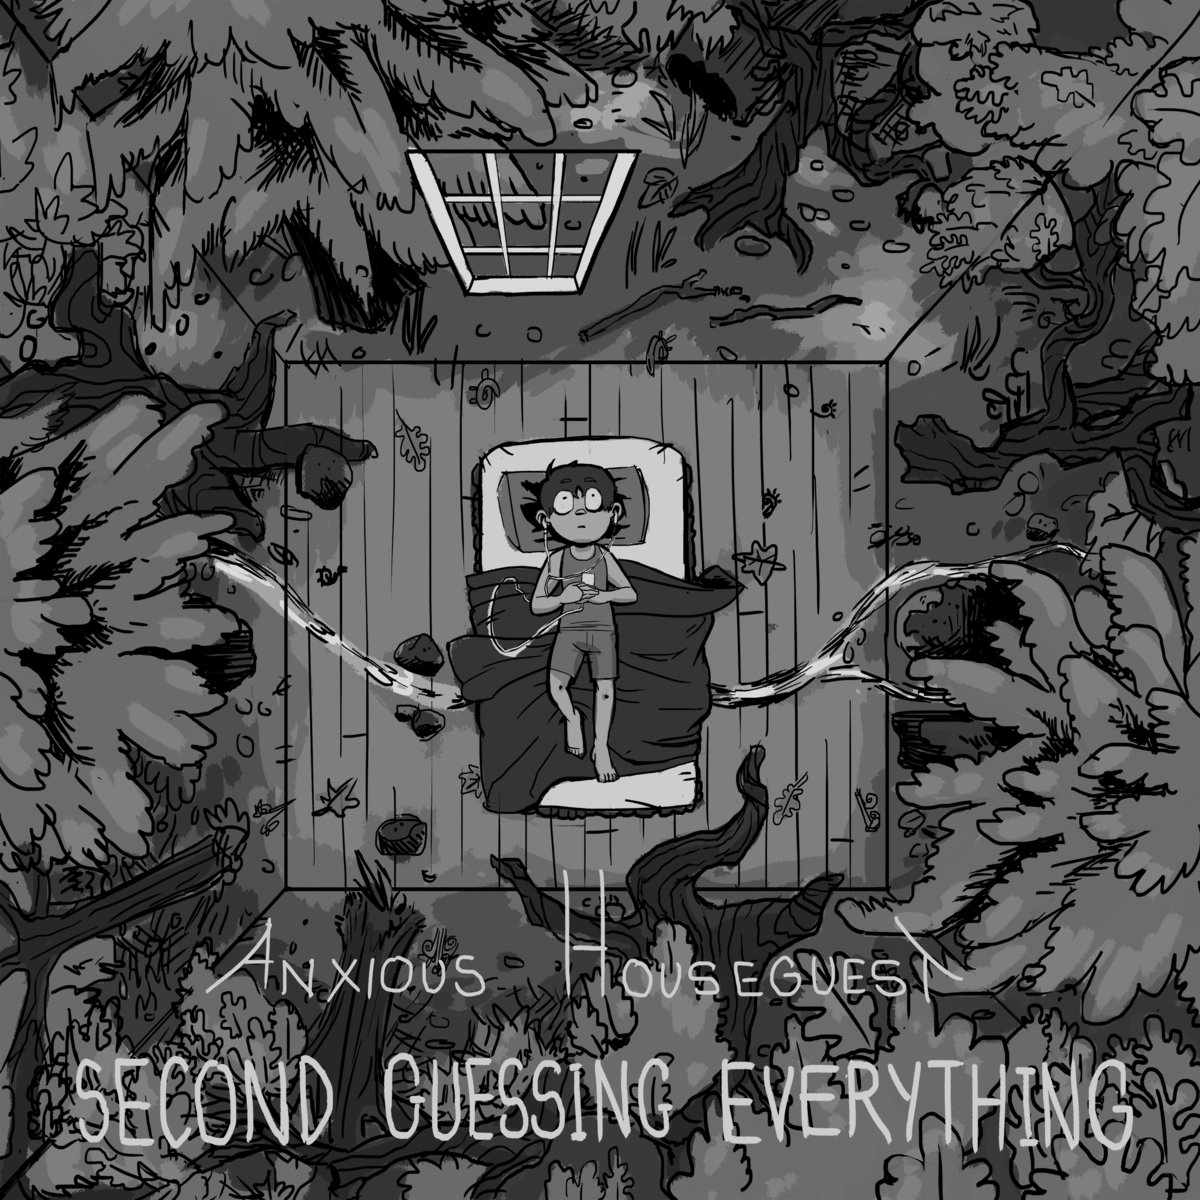  Anxious Houseguest – “The Woods Of This House”